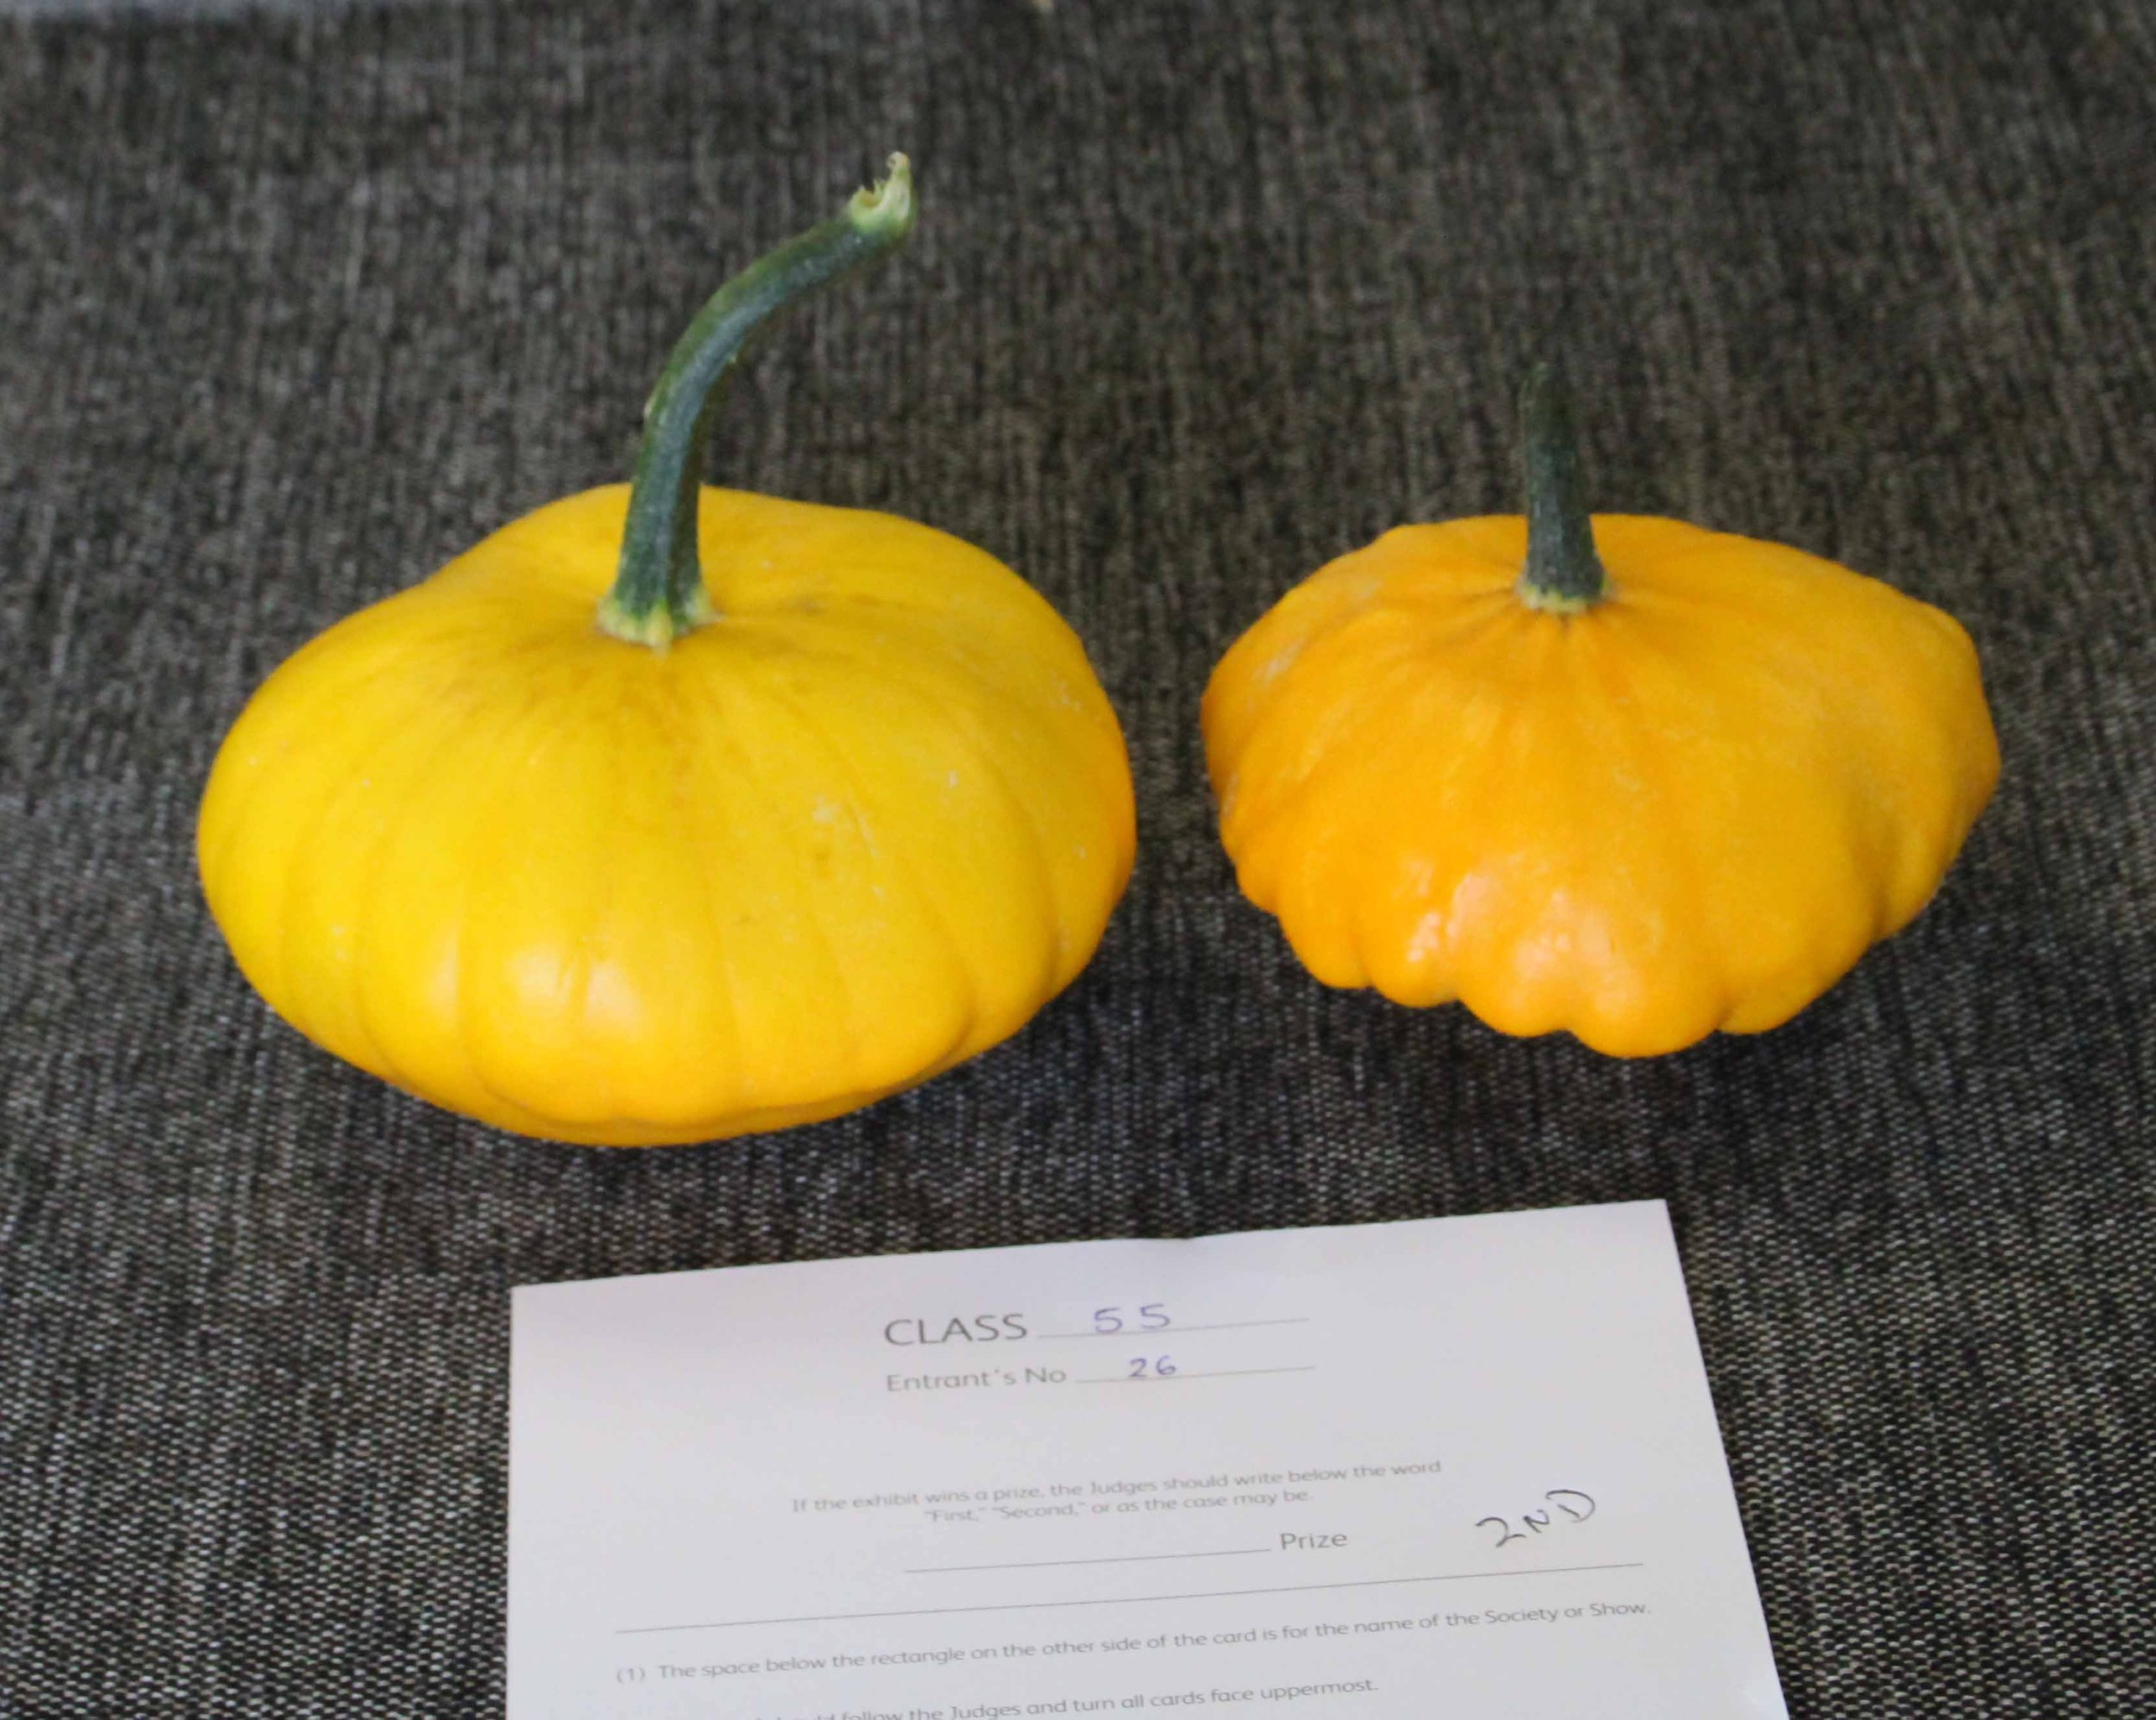 Squash - any other vegetables class.jpg